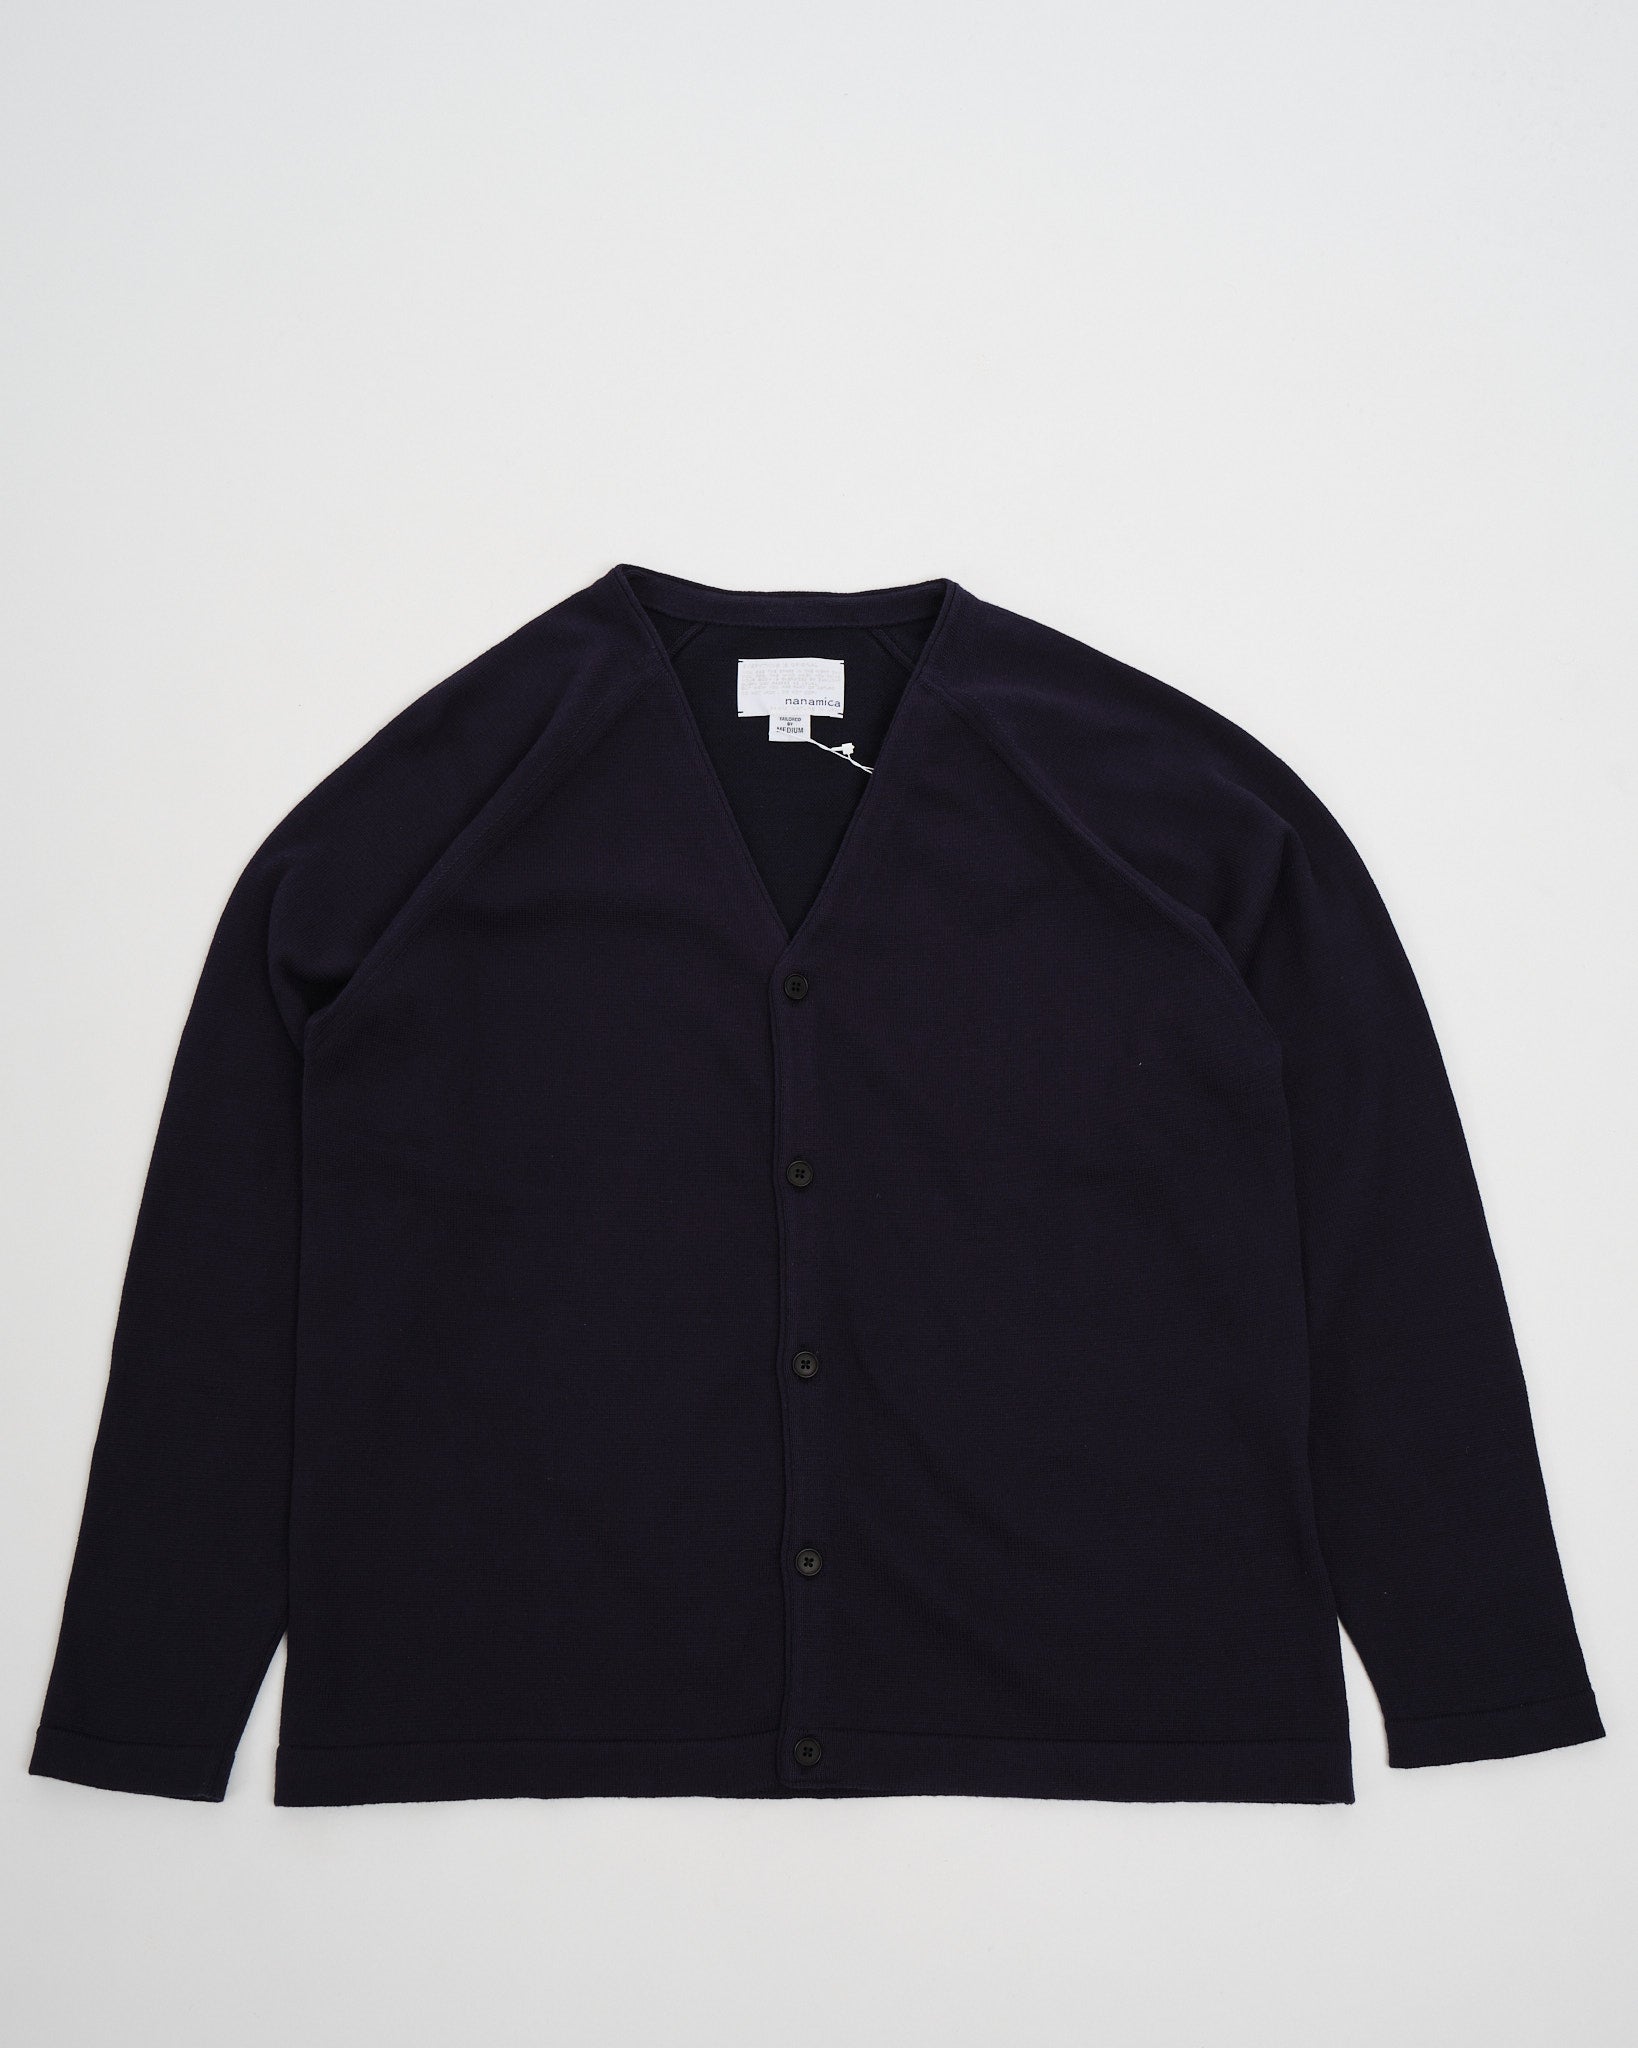 Cotton Cashmere Cardigan Navy by Nanamica ️ Meadow Online Store